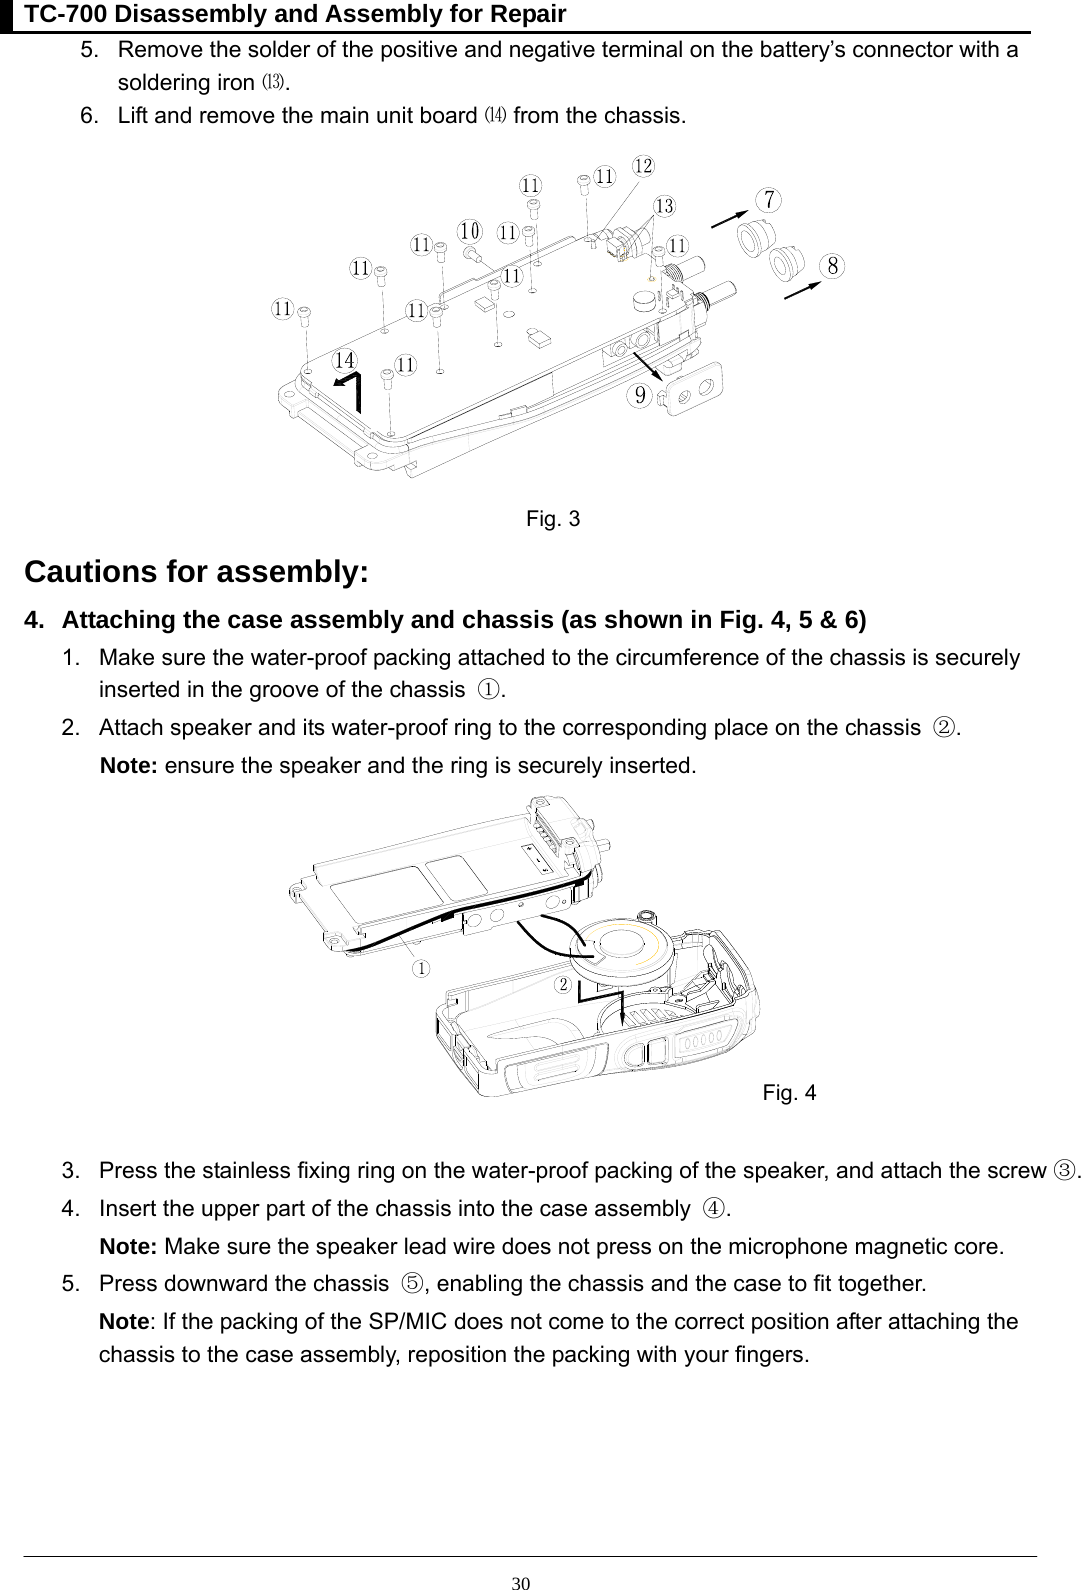 TC-700 Disassembly and Assembly for Repair  305.  Remove the solder of the positive and negative terminal on the battery’s connector with a       soldering iron ⒀.  6.  Lift and remove the main unit board ⒁ from the chassis.  Fig. 3 Cautions for assembly:   4.  Attaching the case assembly and chassis (as shown in Fig. 4, 5 &amp; 6) 1.  Make sure the water-proof packing attached to the circumference of the chassis is securely     inserted in the groove of the chassis  ①. 2.  Attach speaker and its water-proof ring to the corresponding place on the chassis  ②.  Note: ensure the speaker and the ring is securely inserted.   Fig. 4  3.  Press the stainless fixing ring on the water-proof packing of the speaker, and attach the screw ③. 4.  Insert the upper part of the chassis into the case assembly  ④.  Note: Make sure the speaker lead wire does not press on the microphone magnetic core. 5.  Press downward the chassis  ⑤, enabling the chassis and the case to fit together.   Note: If the packing of the SP/MIC does not come to the correct position after attaching the chassis to the case assembly, reposition the packing with your fingers.  